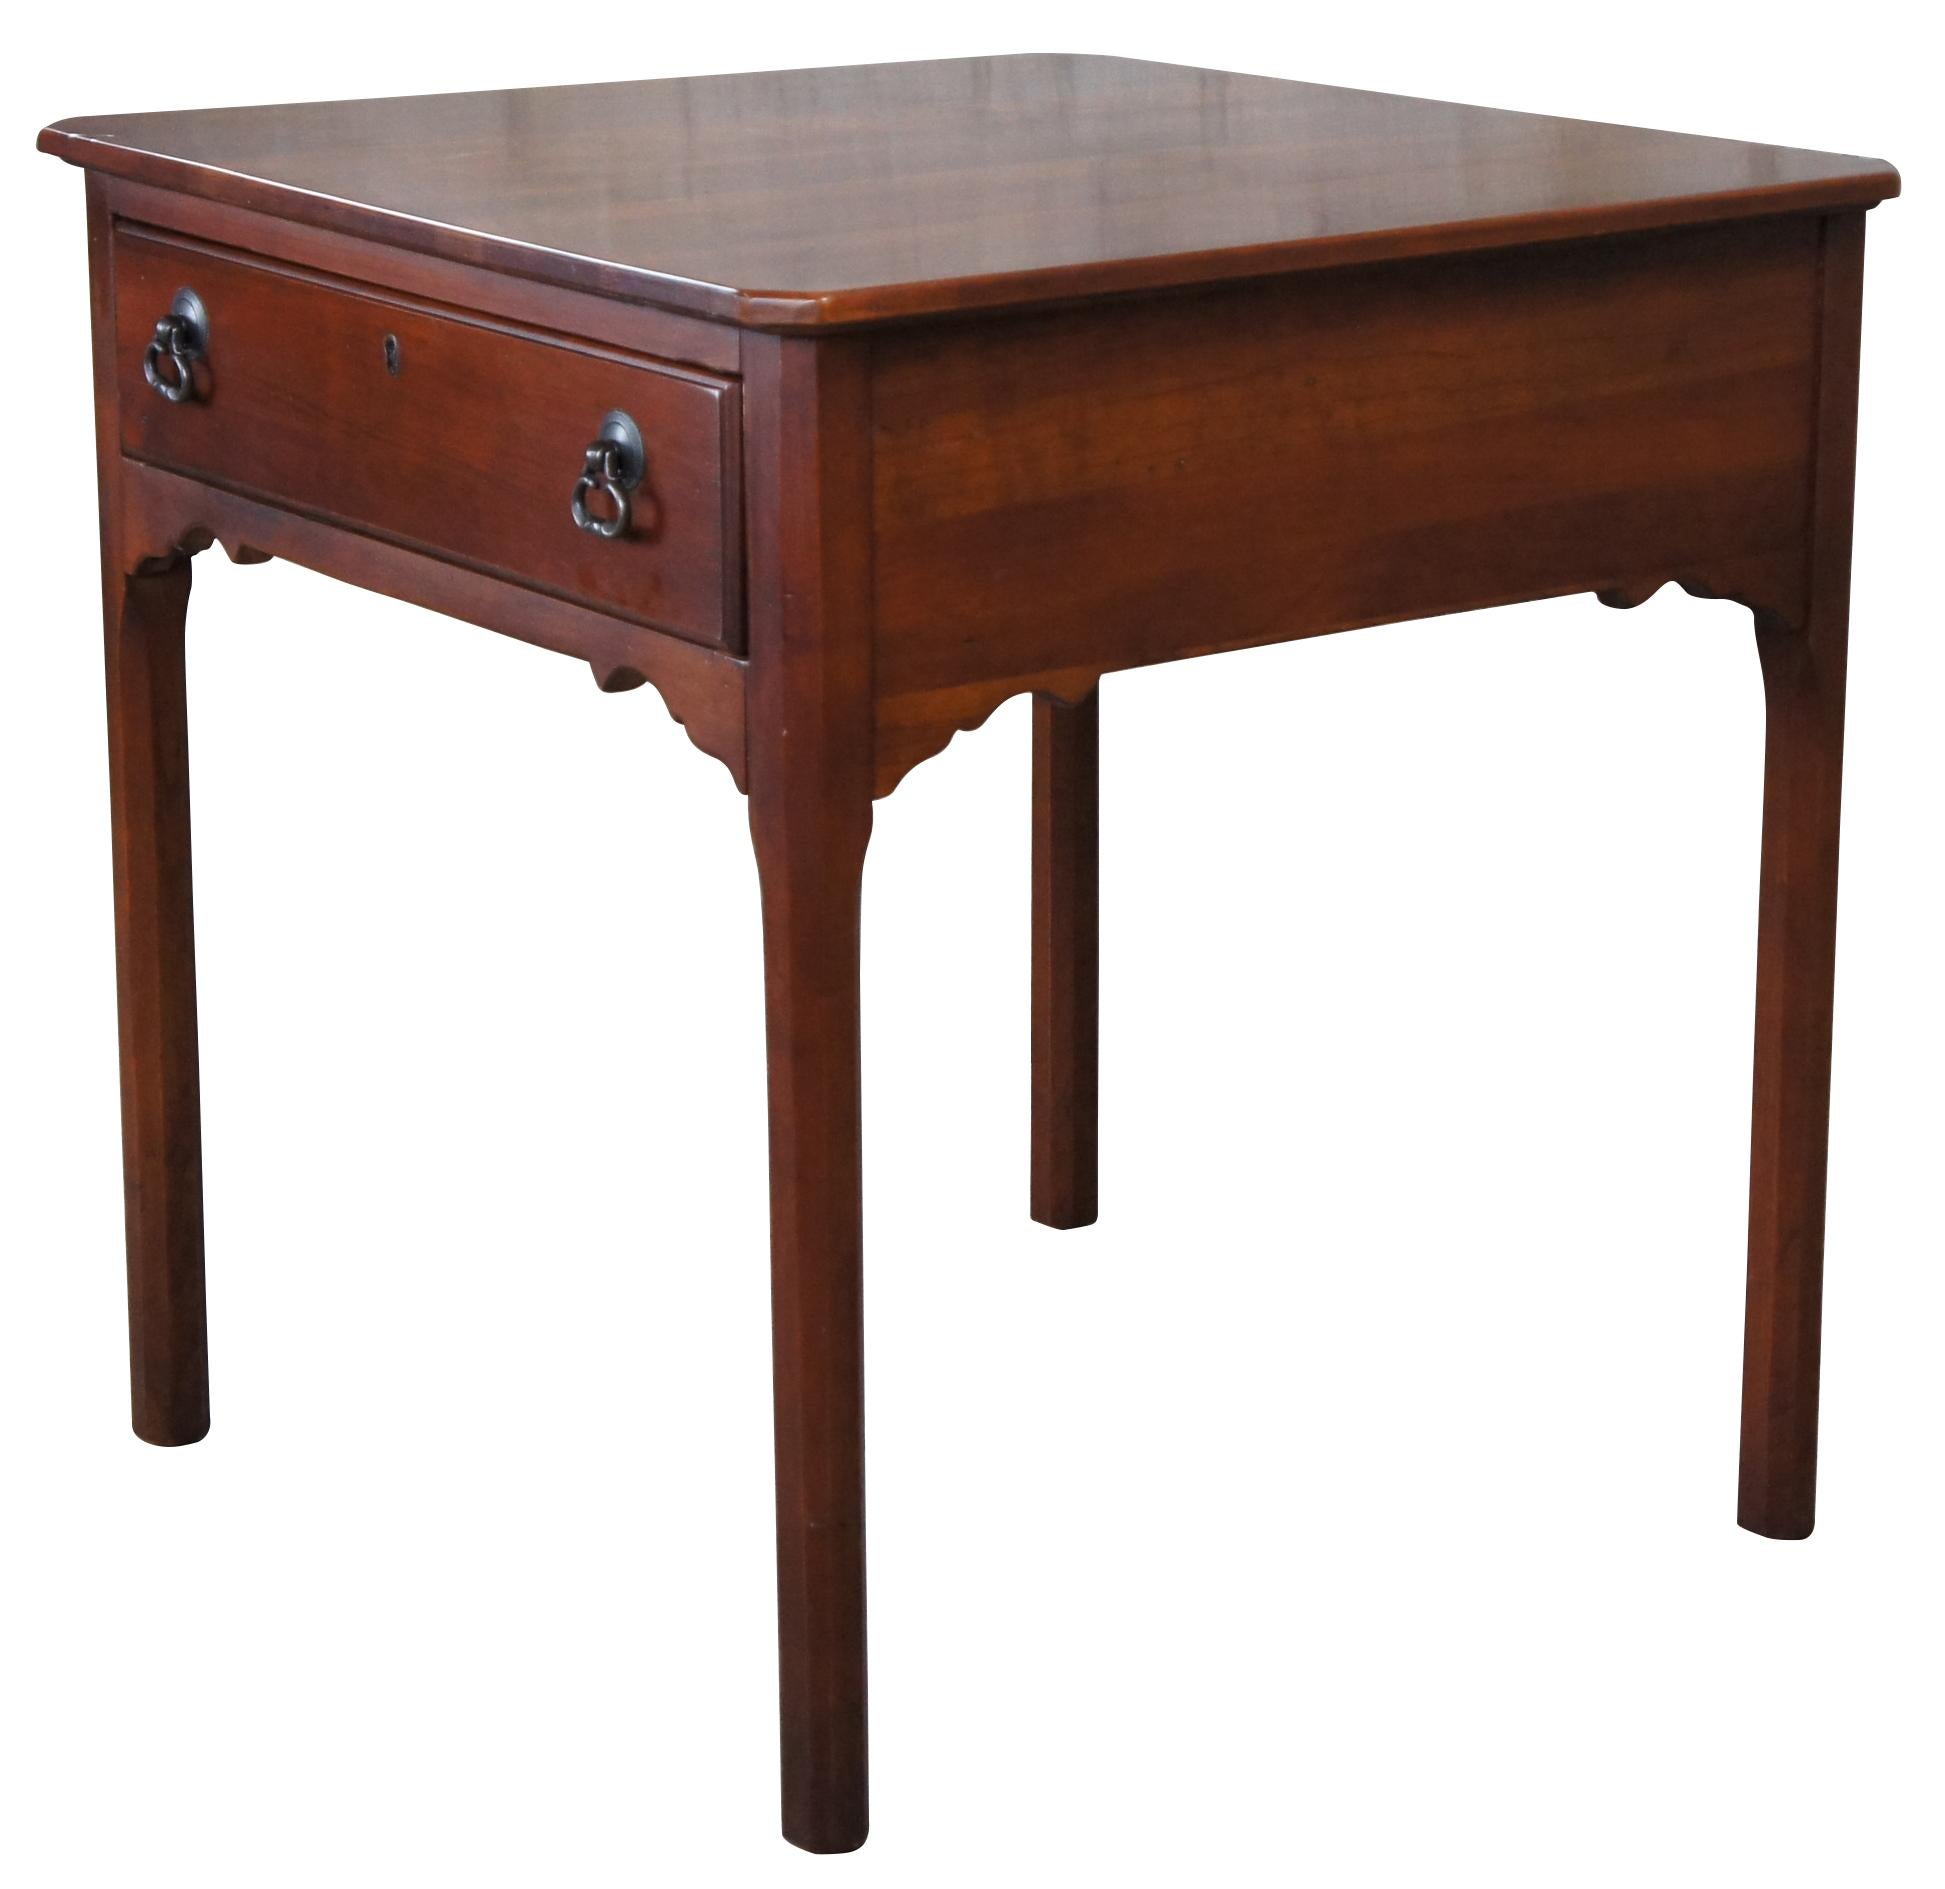 Vintage Lexington Furniture Bob Timberlake Collection lamp table. Made of cherry featuring square form with notched corners, one drawer and serpentine skirt. Measure: 24